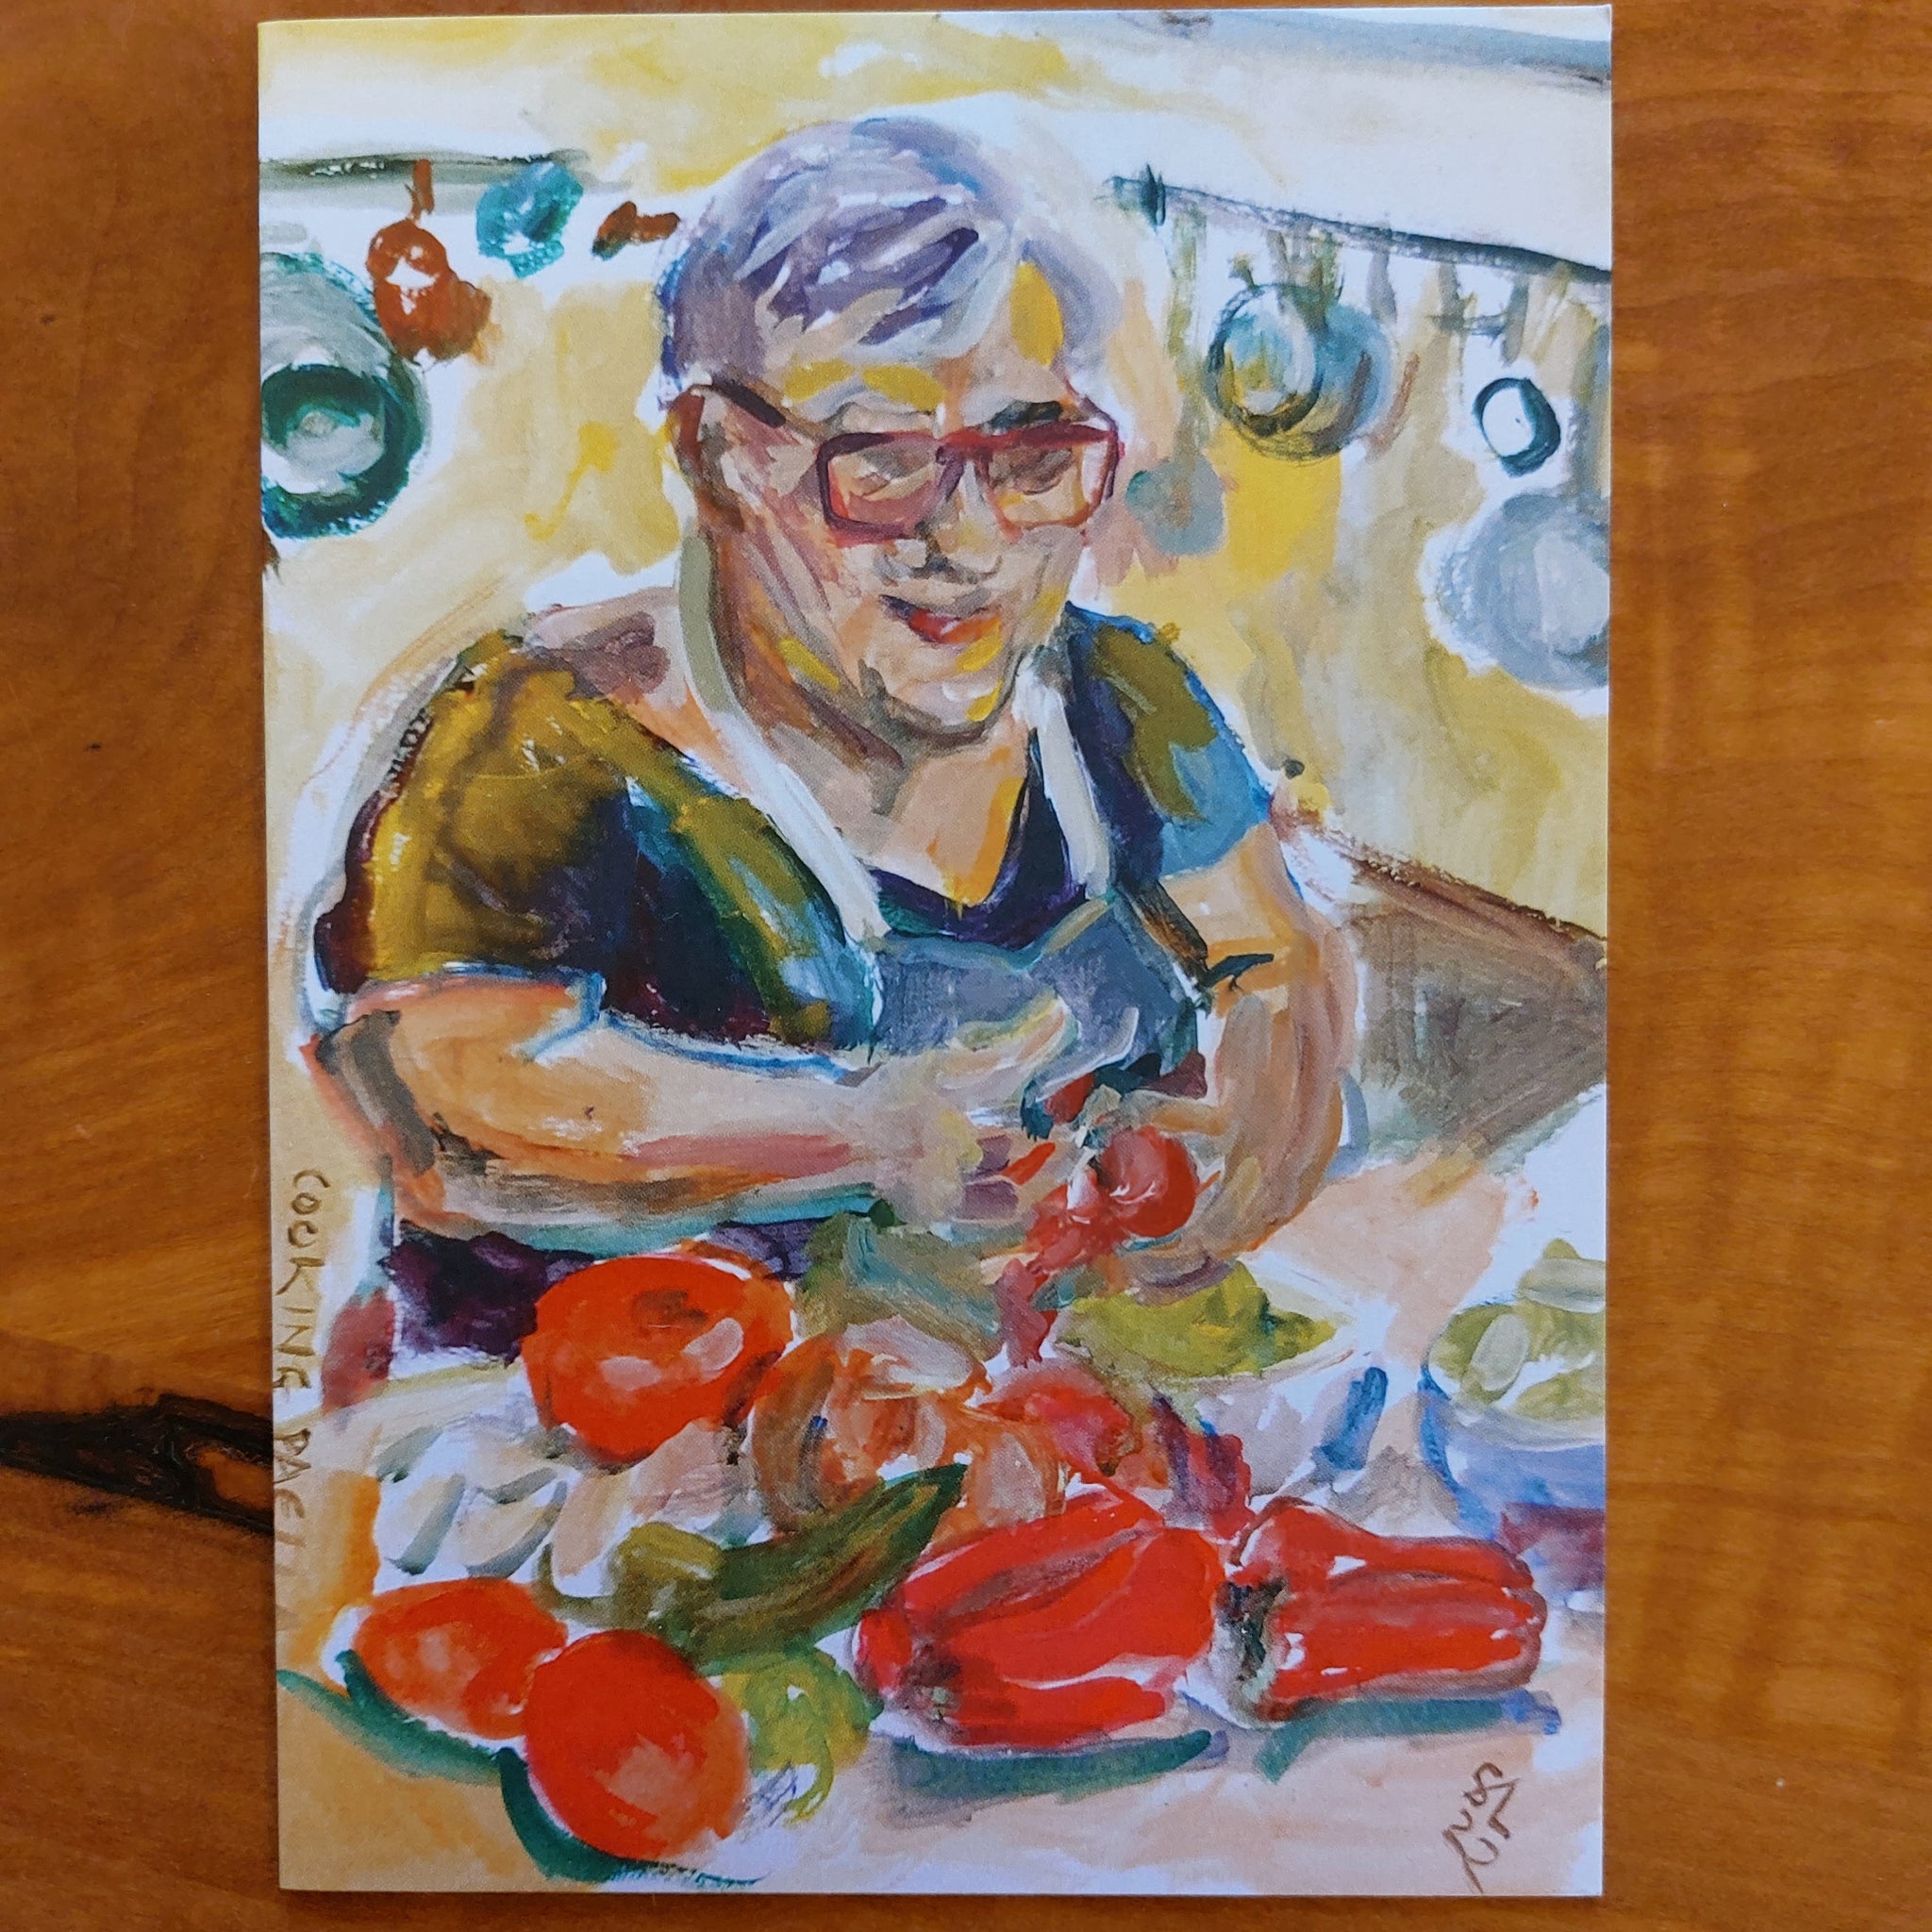 Cards, set of 3: Food Stories